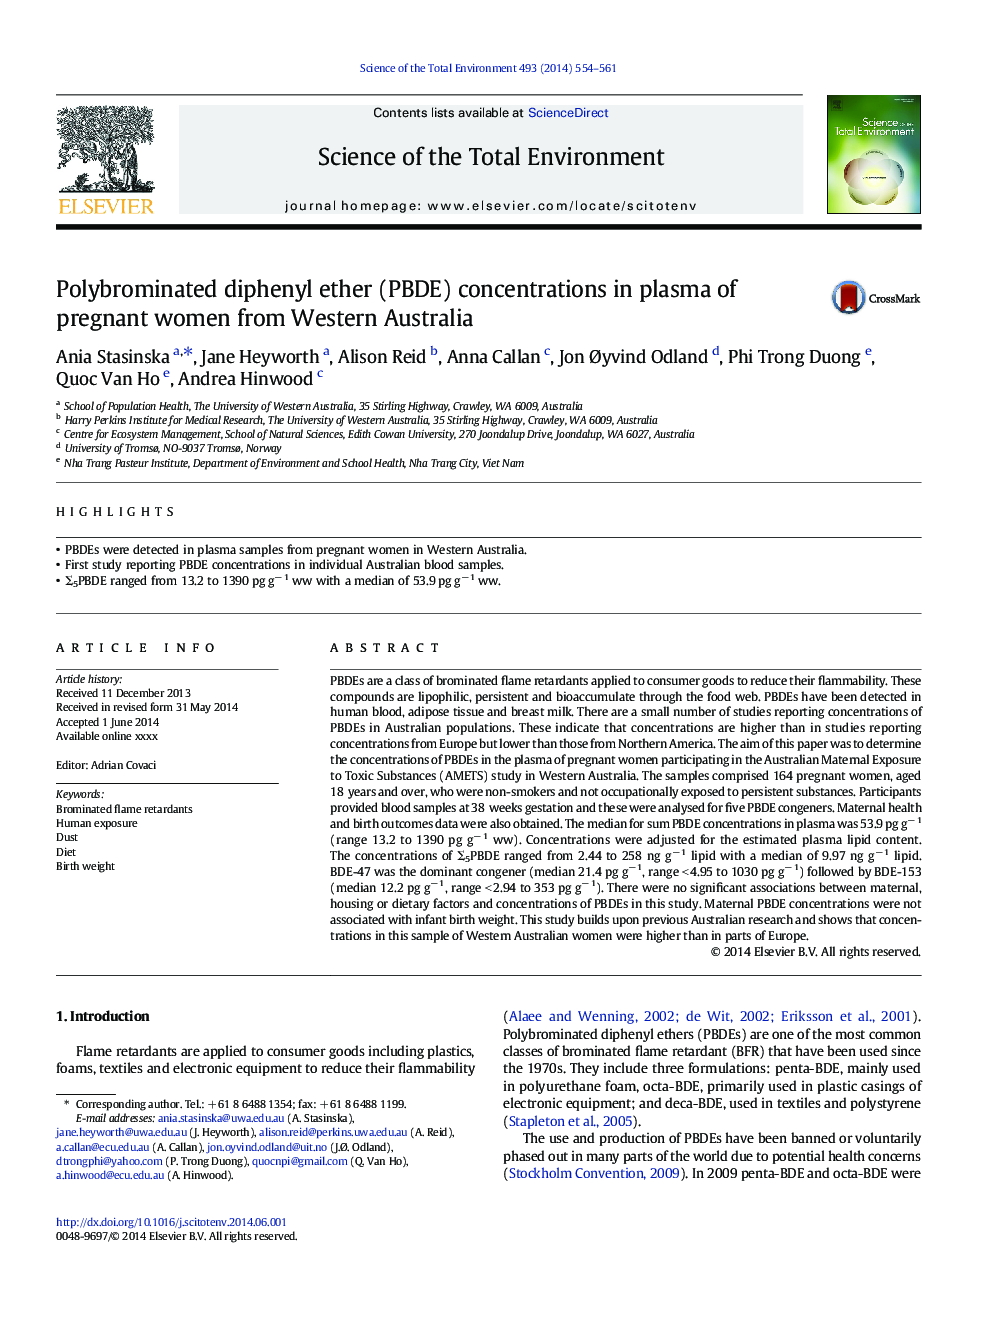 Polybrominated diphenyl ether (PBDE) concentrations in plasma of pregnant women from Western Australia